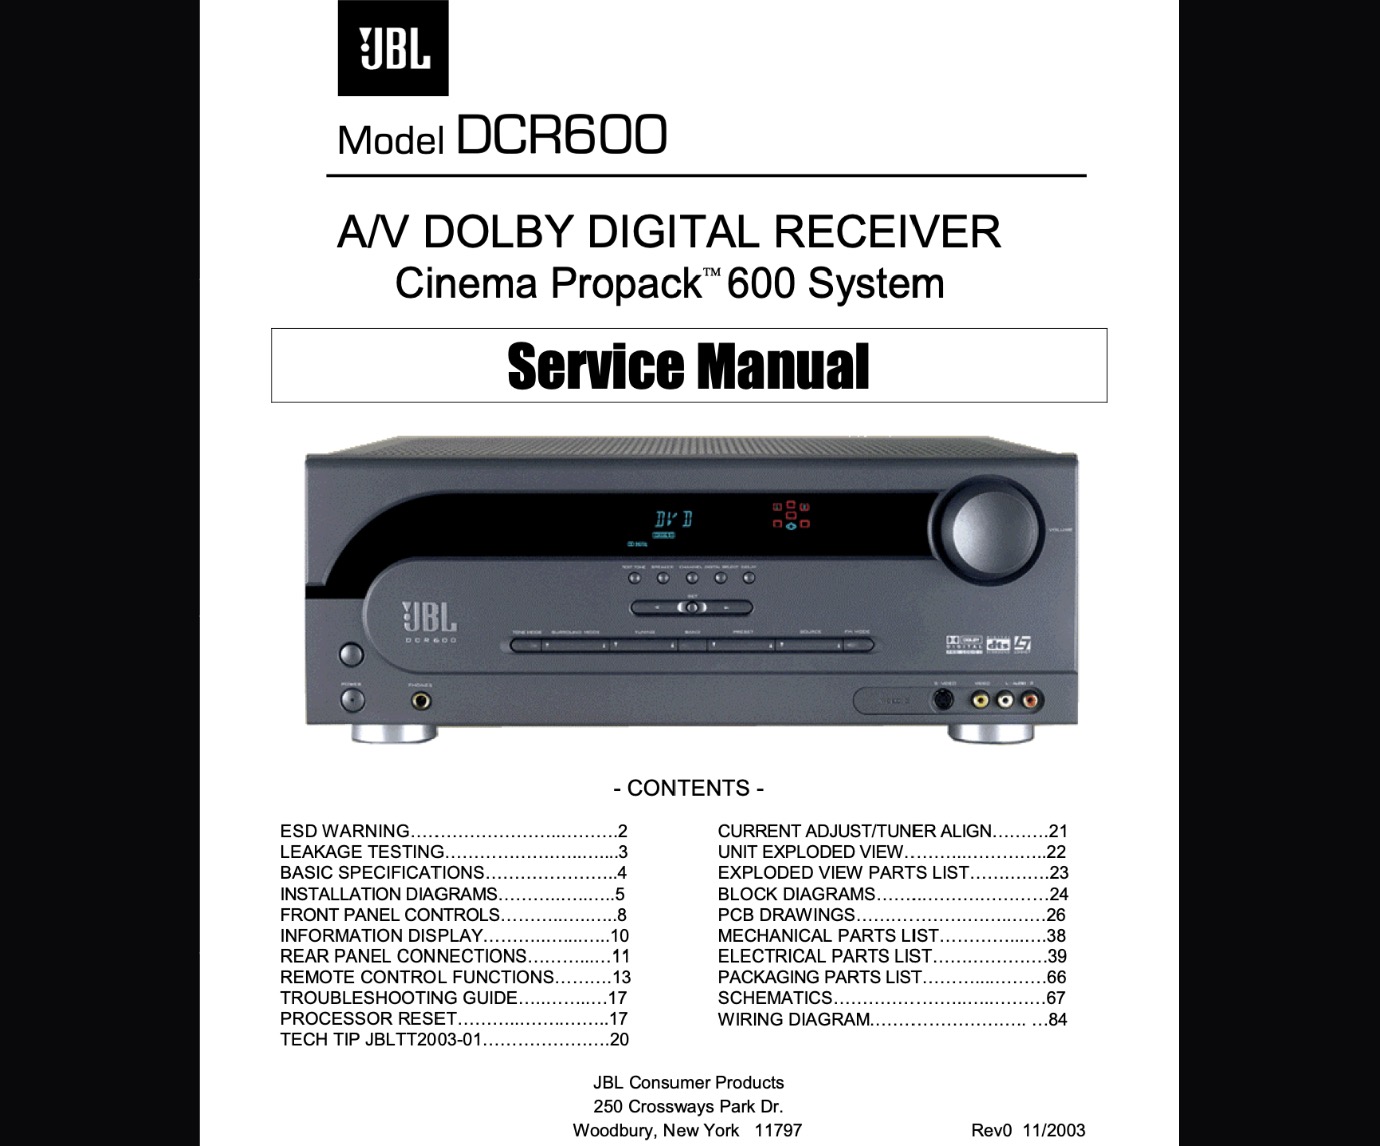 JBL DCR600 A/V DOLBY DIGITAL RECEIVER Cinema Propack 600 System Service Manual, Exploded View, Schematic Diagram, Cirquit Board